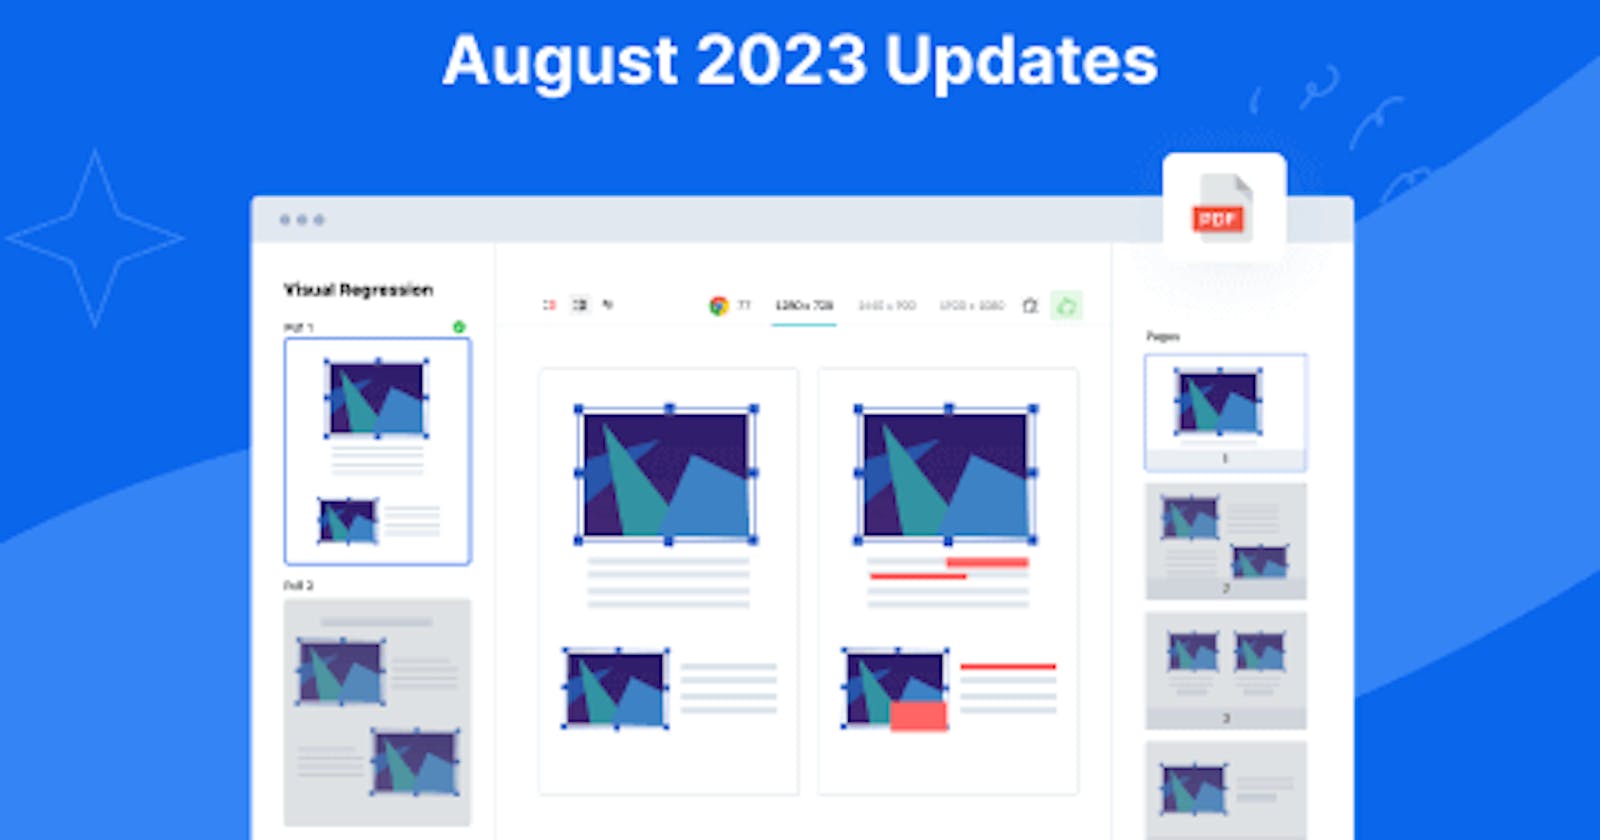 August’23 Updates: Web Automation on macOS Sonoma, Command Log Annotations, SmartUI PDF Testing, And More